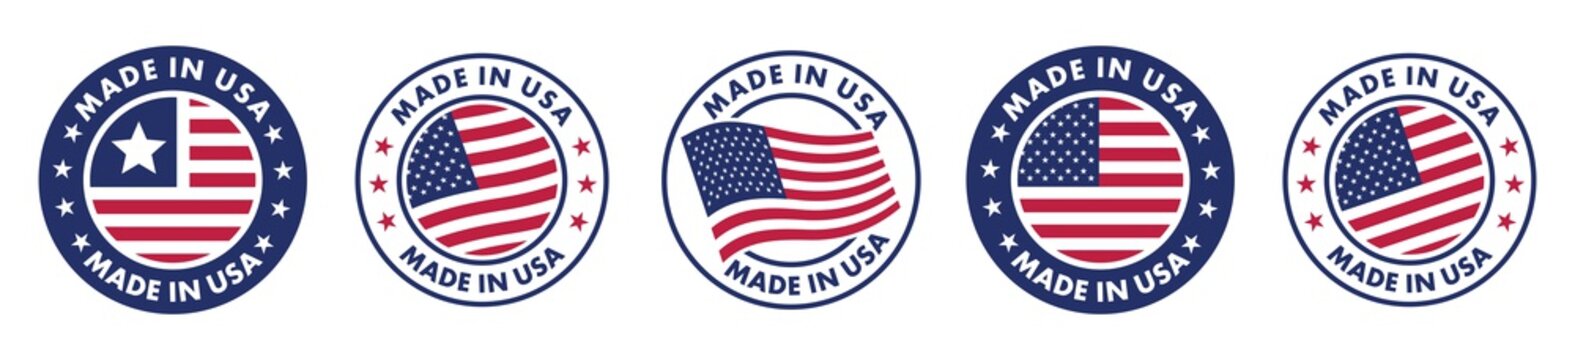 made in the usa labels set, made in the usa logo, usa flag , american product emblem, vector illustr